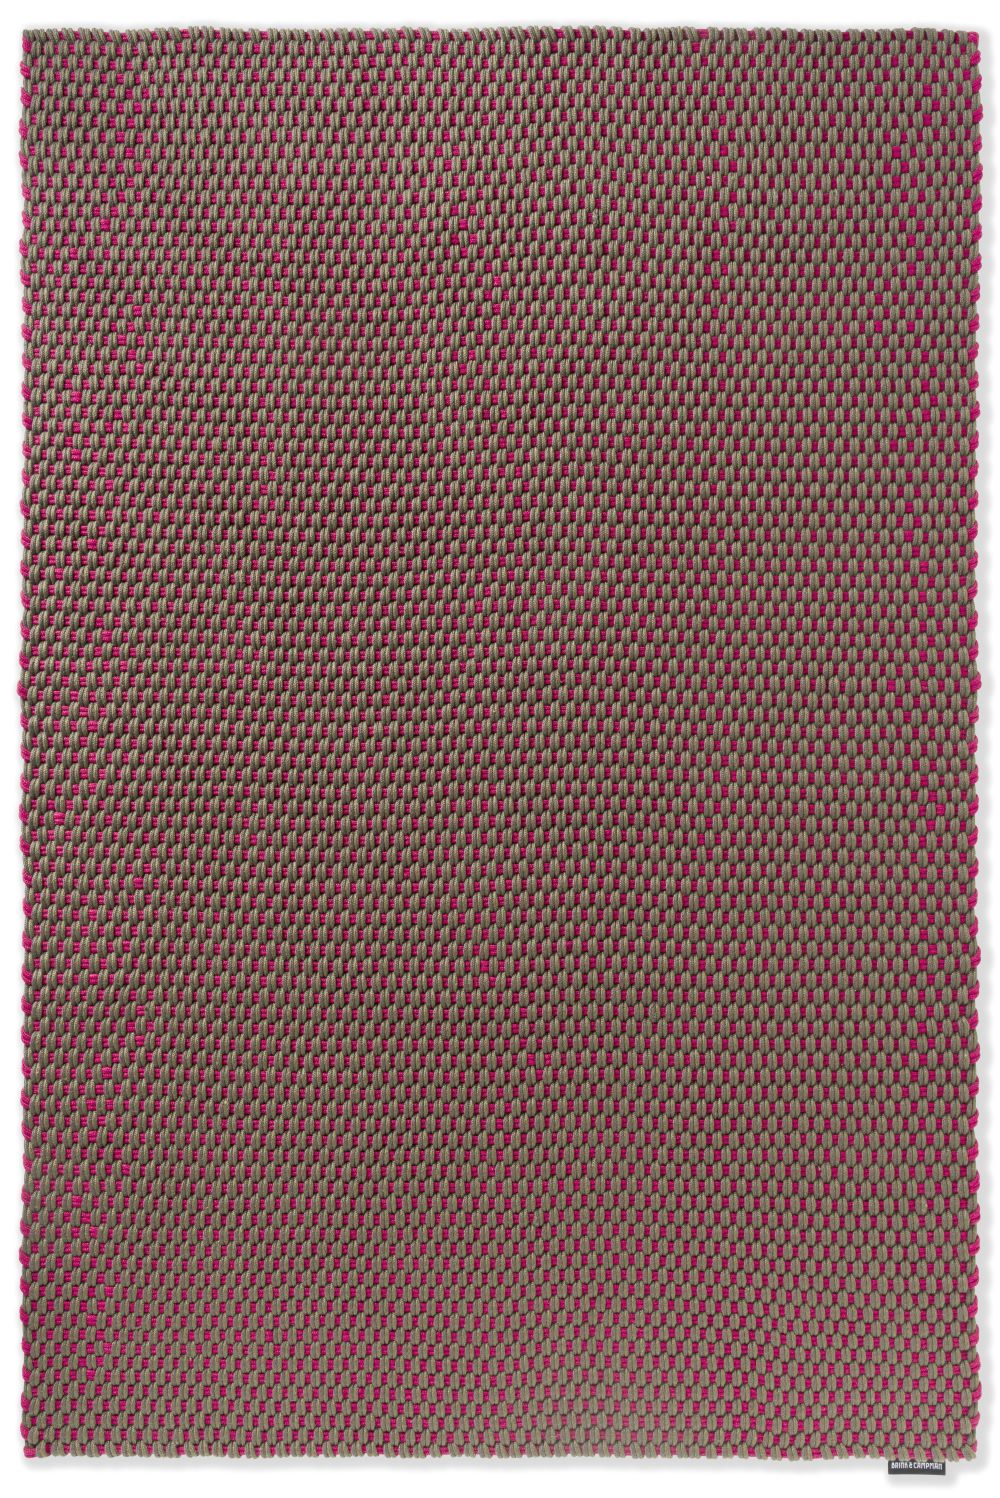 brink-campman-rug-outdoor-lace-tricolore-thyme-grey-pink-496904